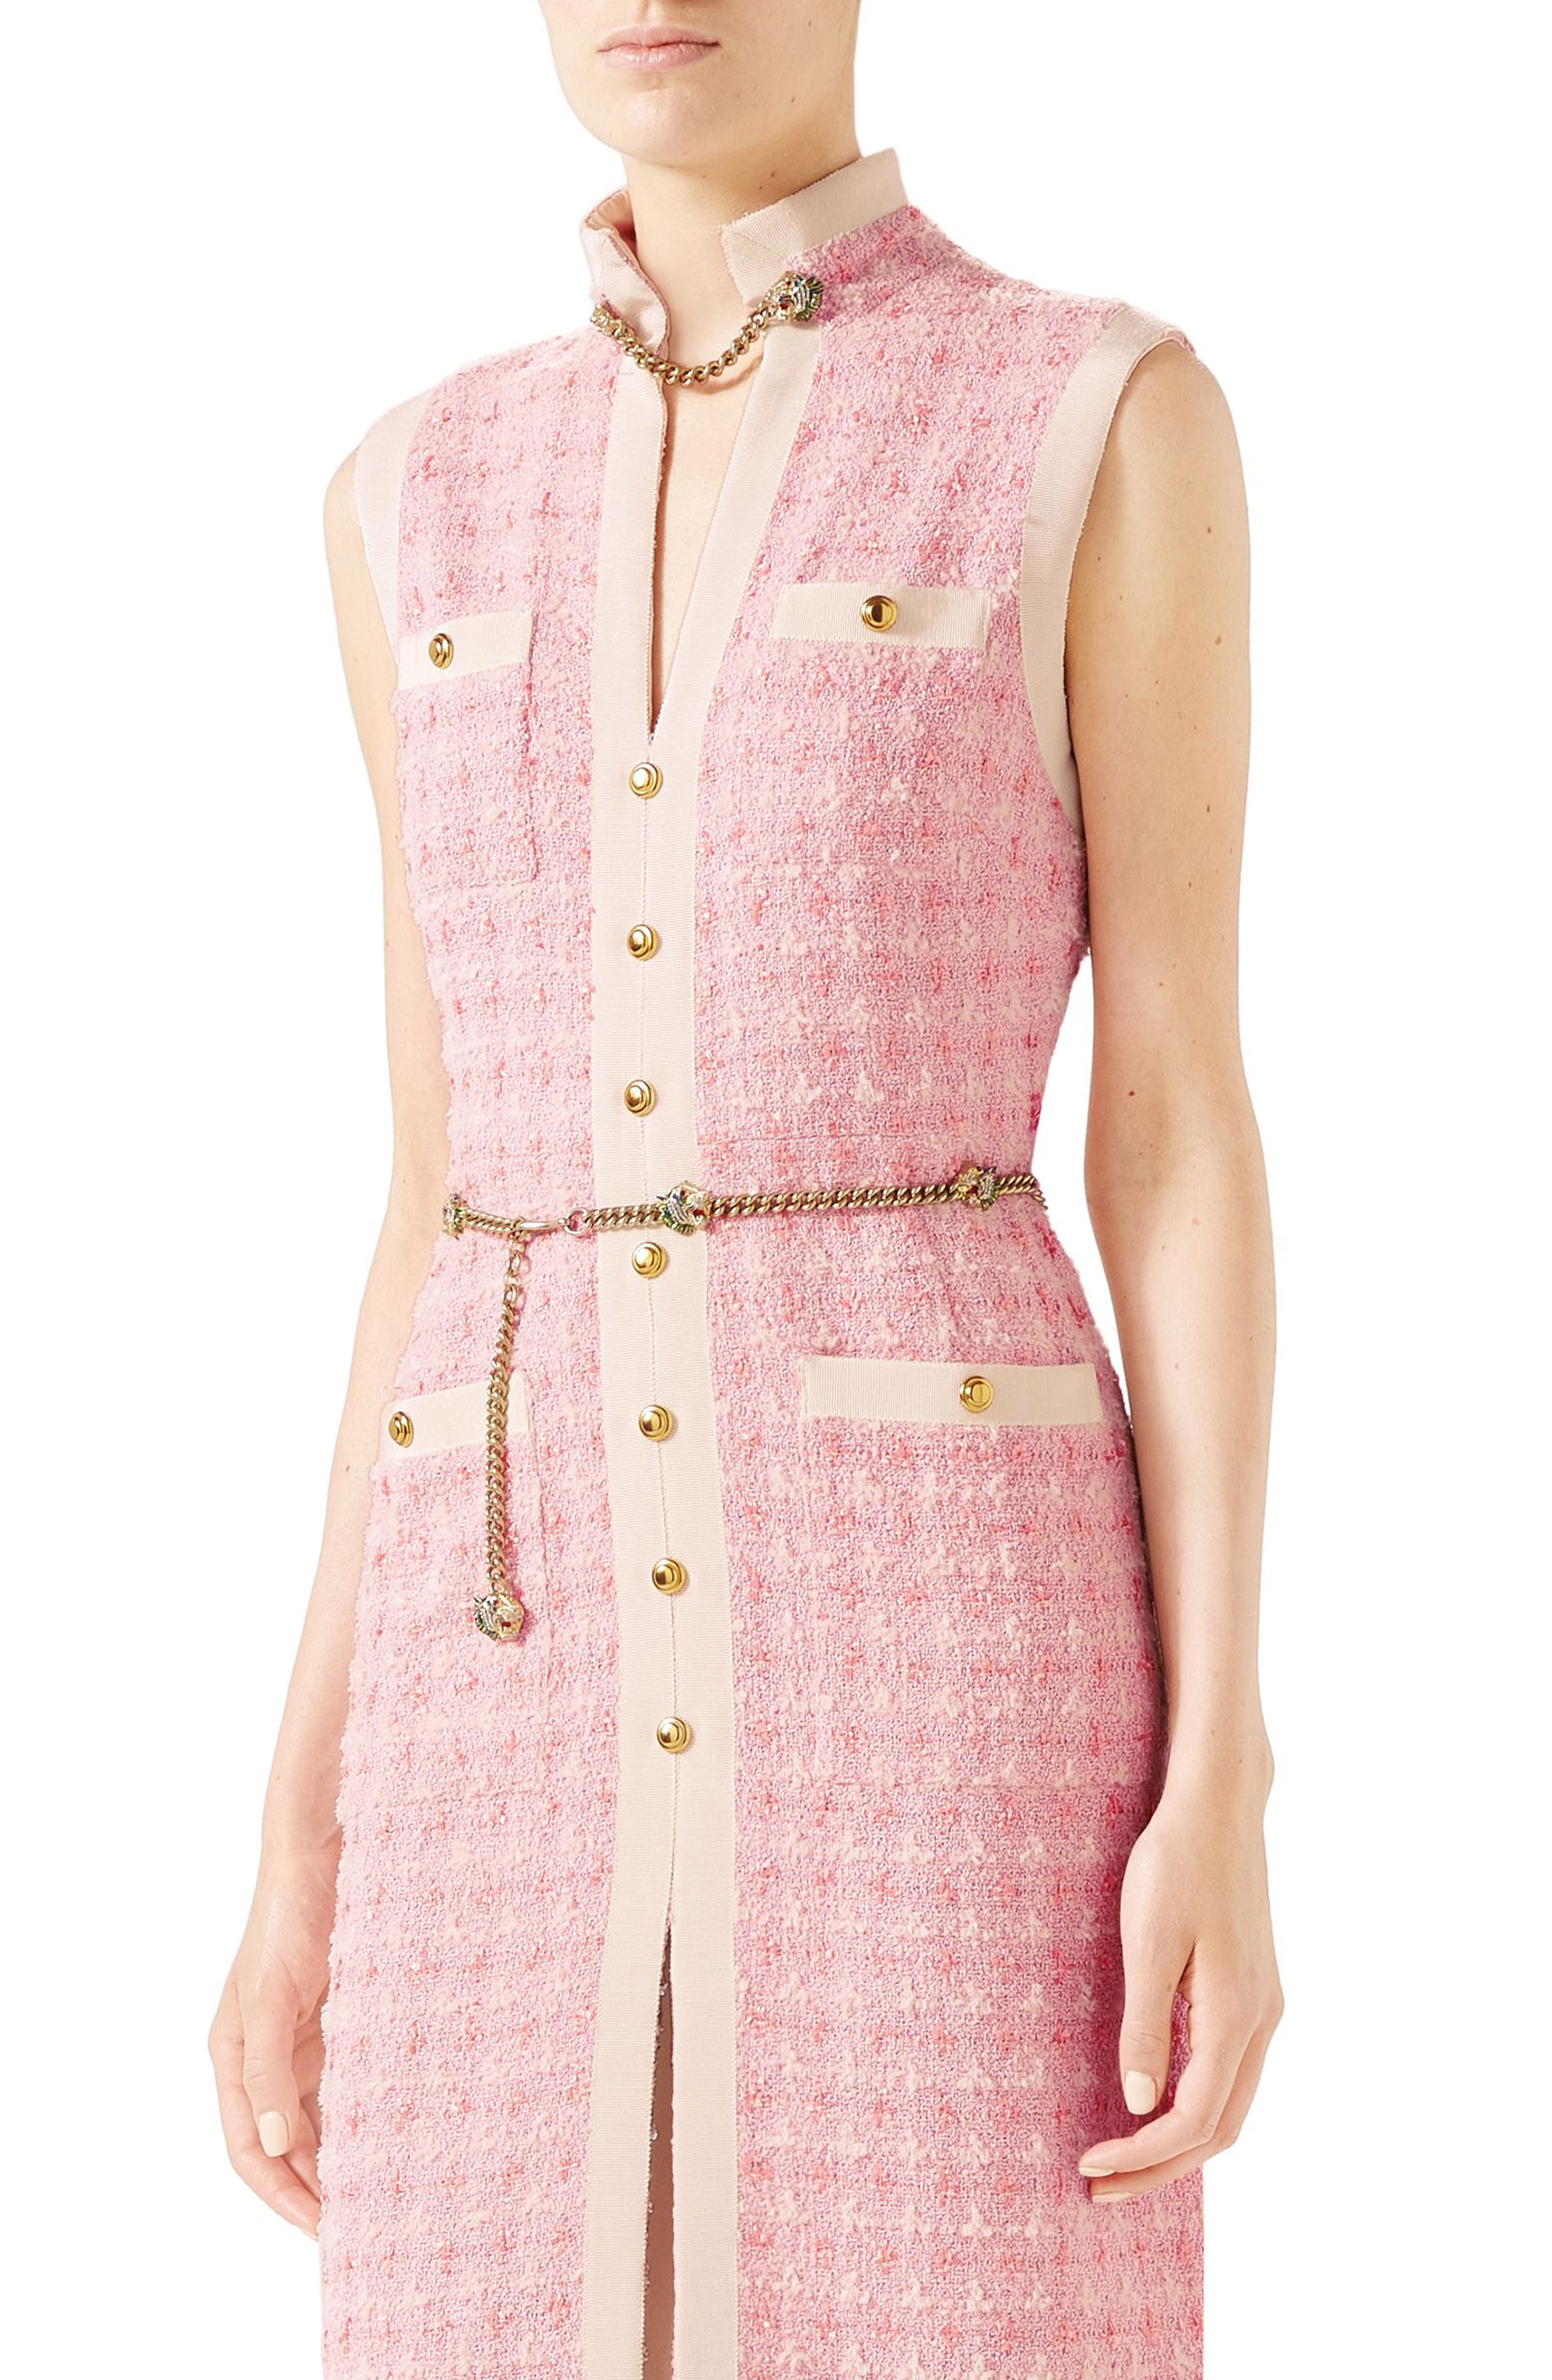 Gucci Chain Embellished Tweed Dress | Nordstrom